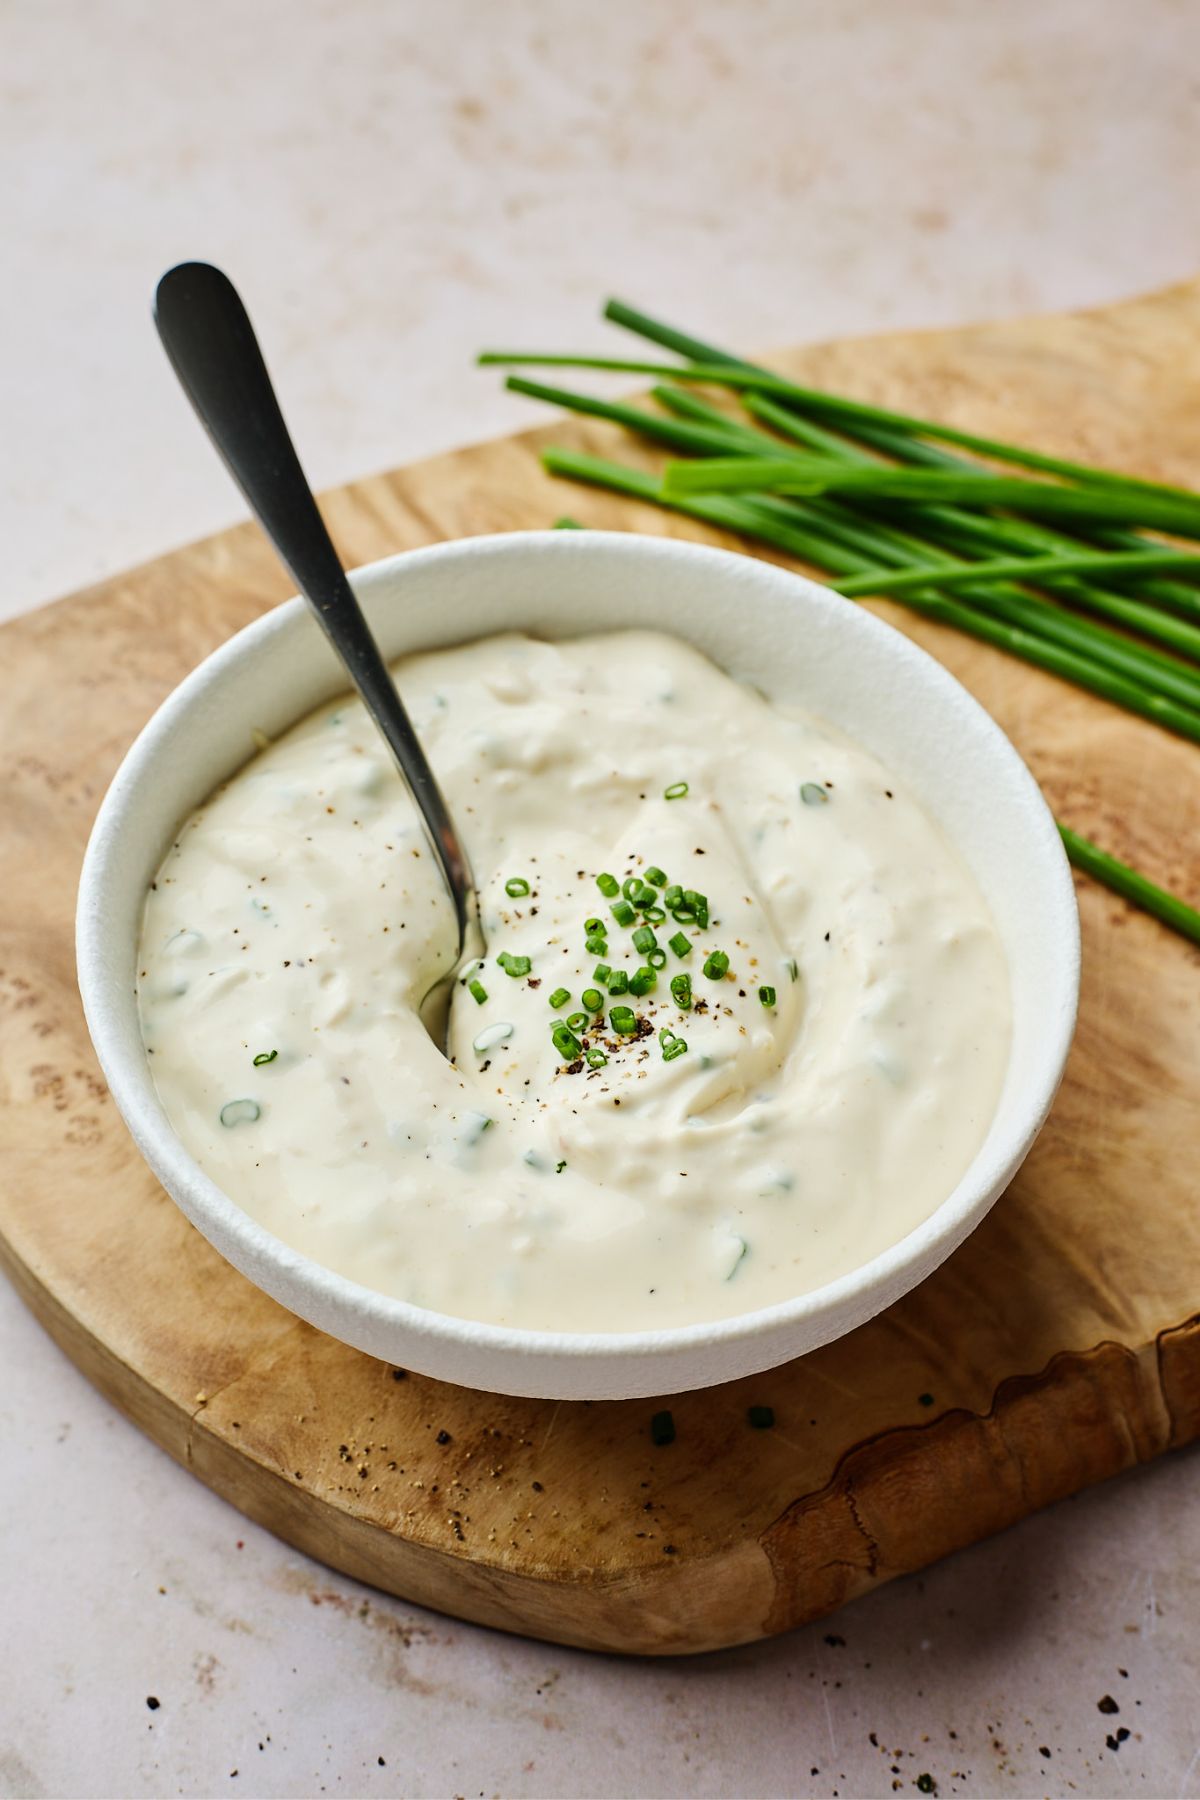 A bowl full of horseradish sauce recipe garnished with chives with a spoon on it